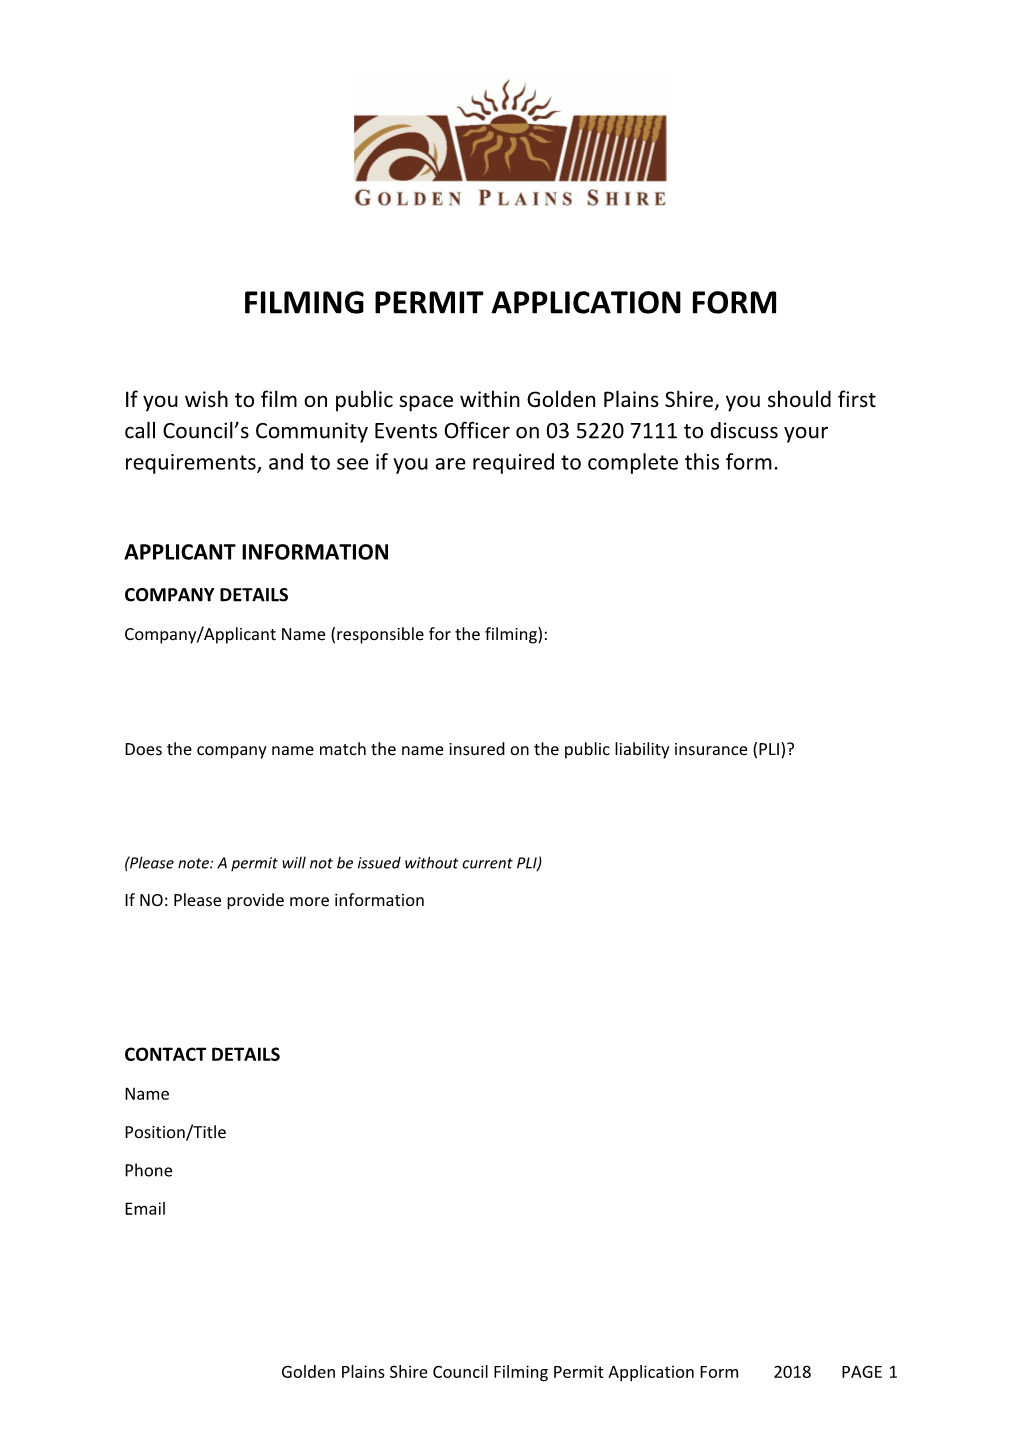 Filming Permit Application Form